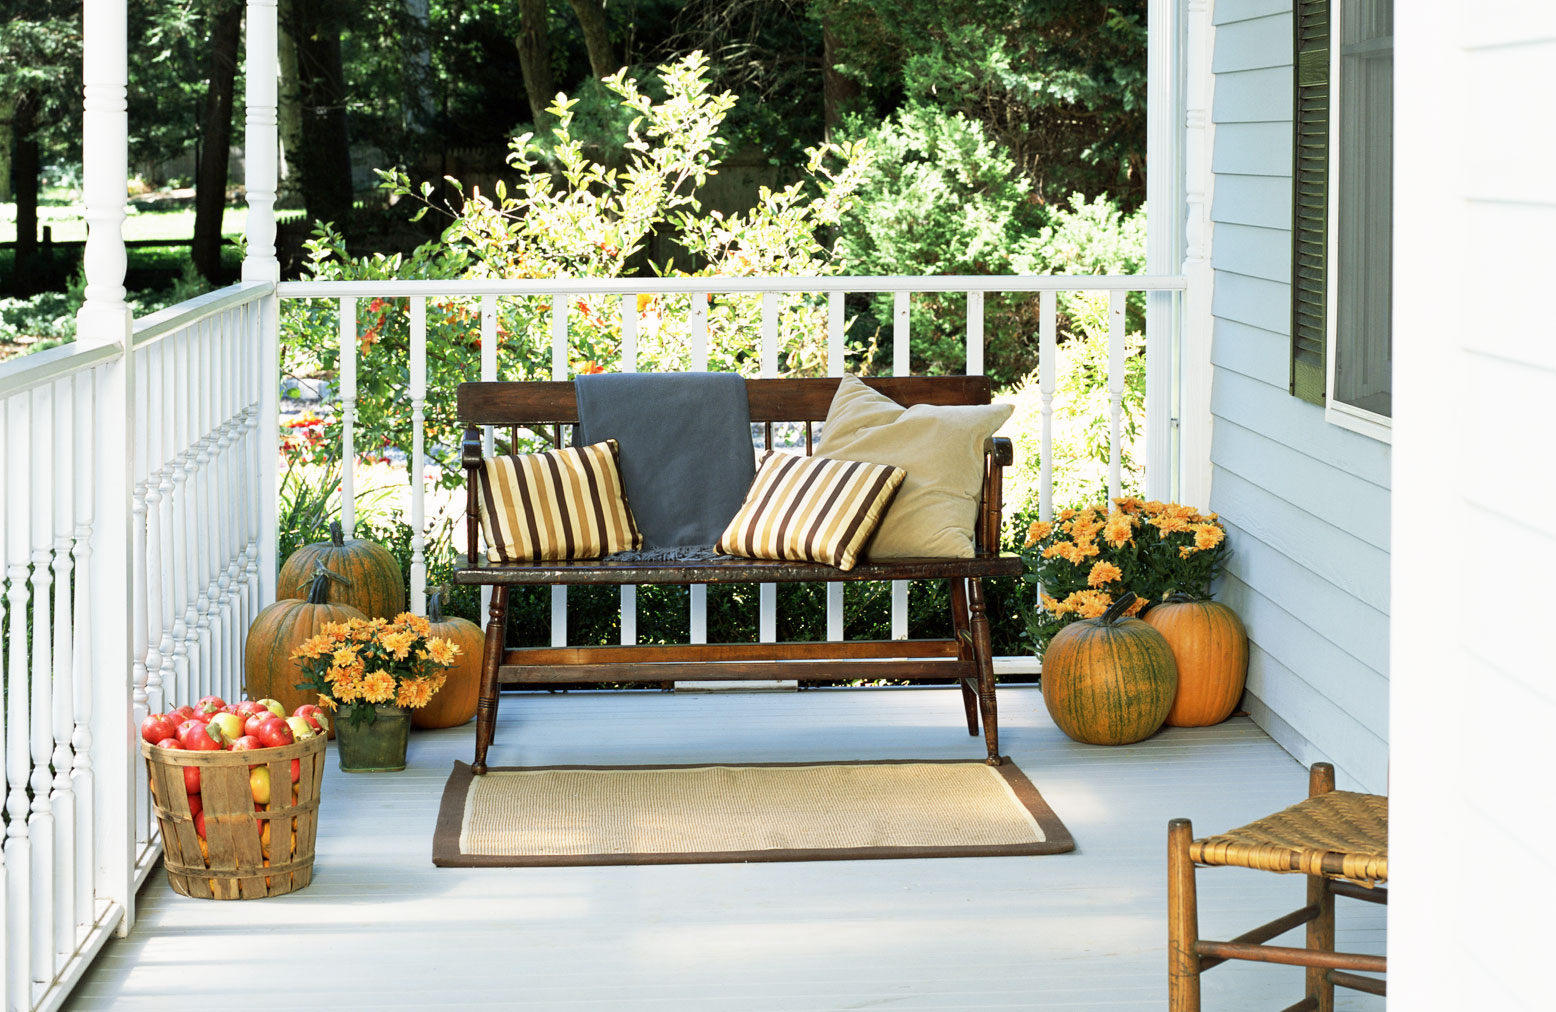 fall porch with vintage wooden bench, striped pillows in fall colors and pumpkins and apples in a basket